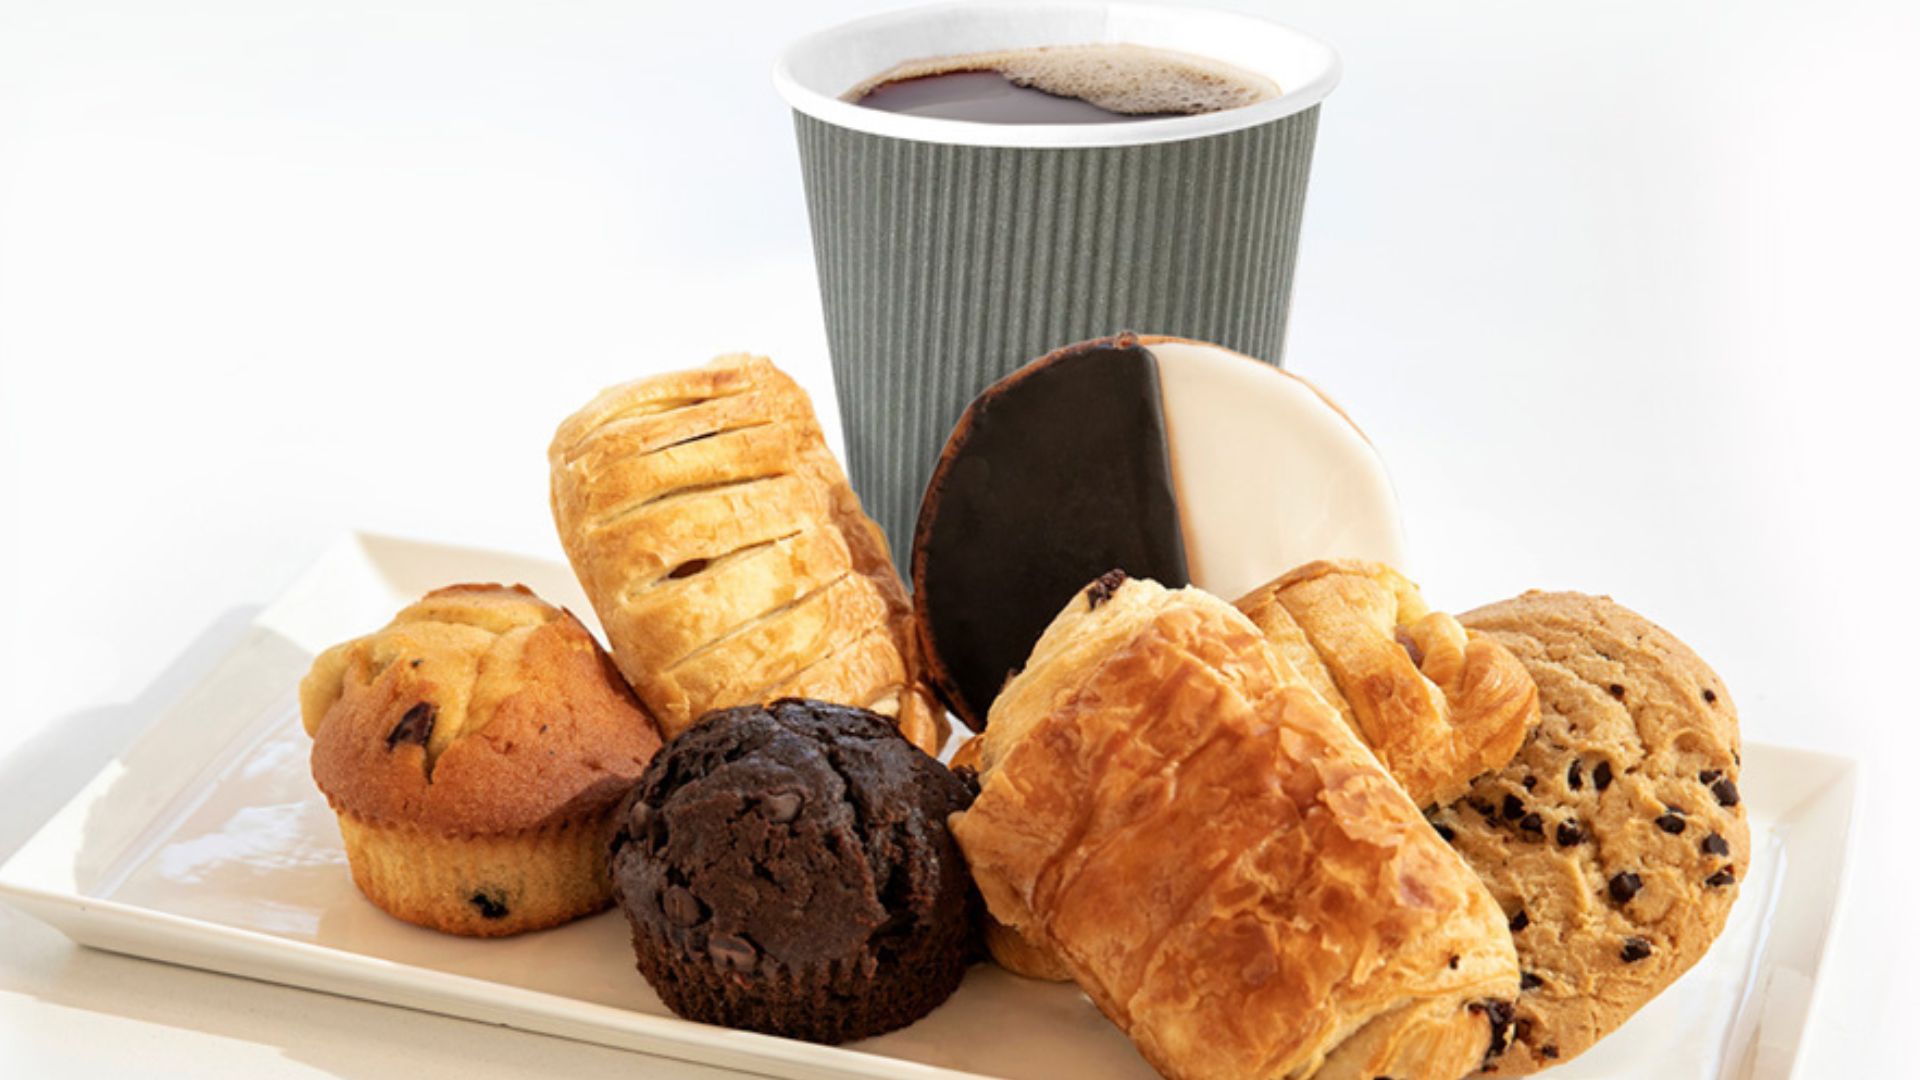 A cup of coffee on a tray, surrounded by pastries